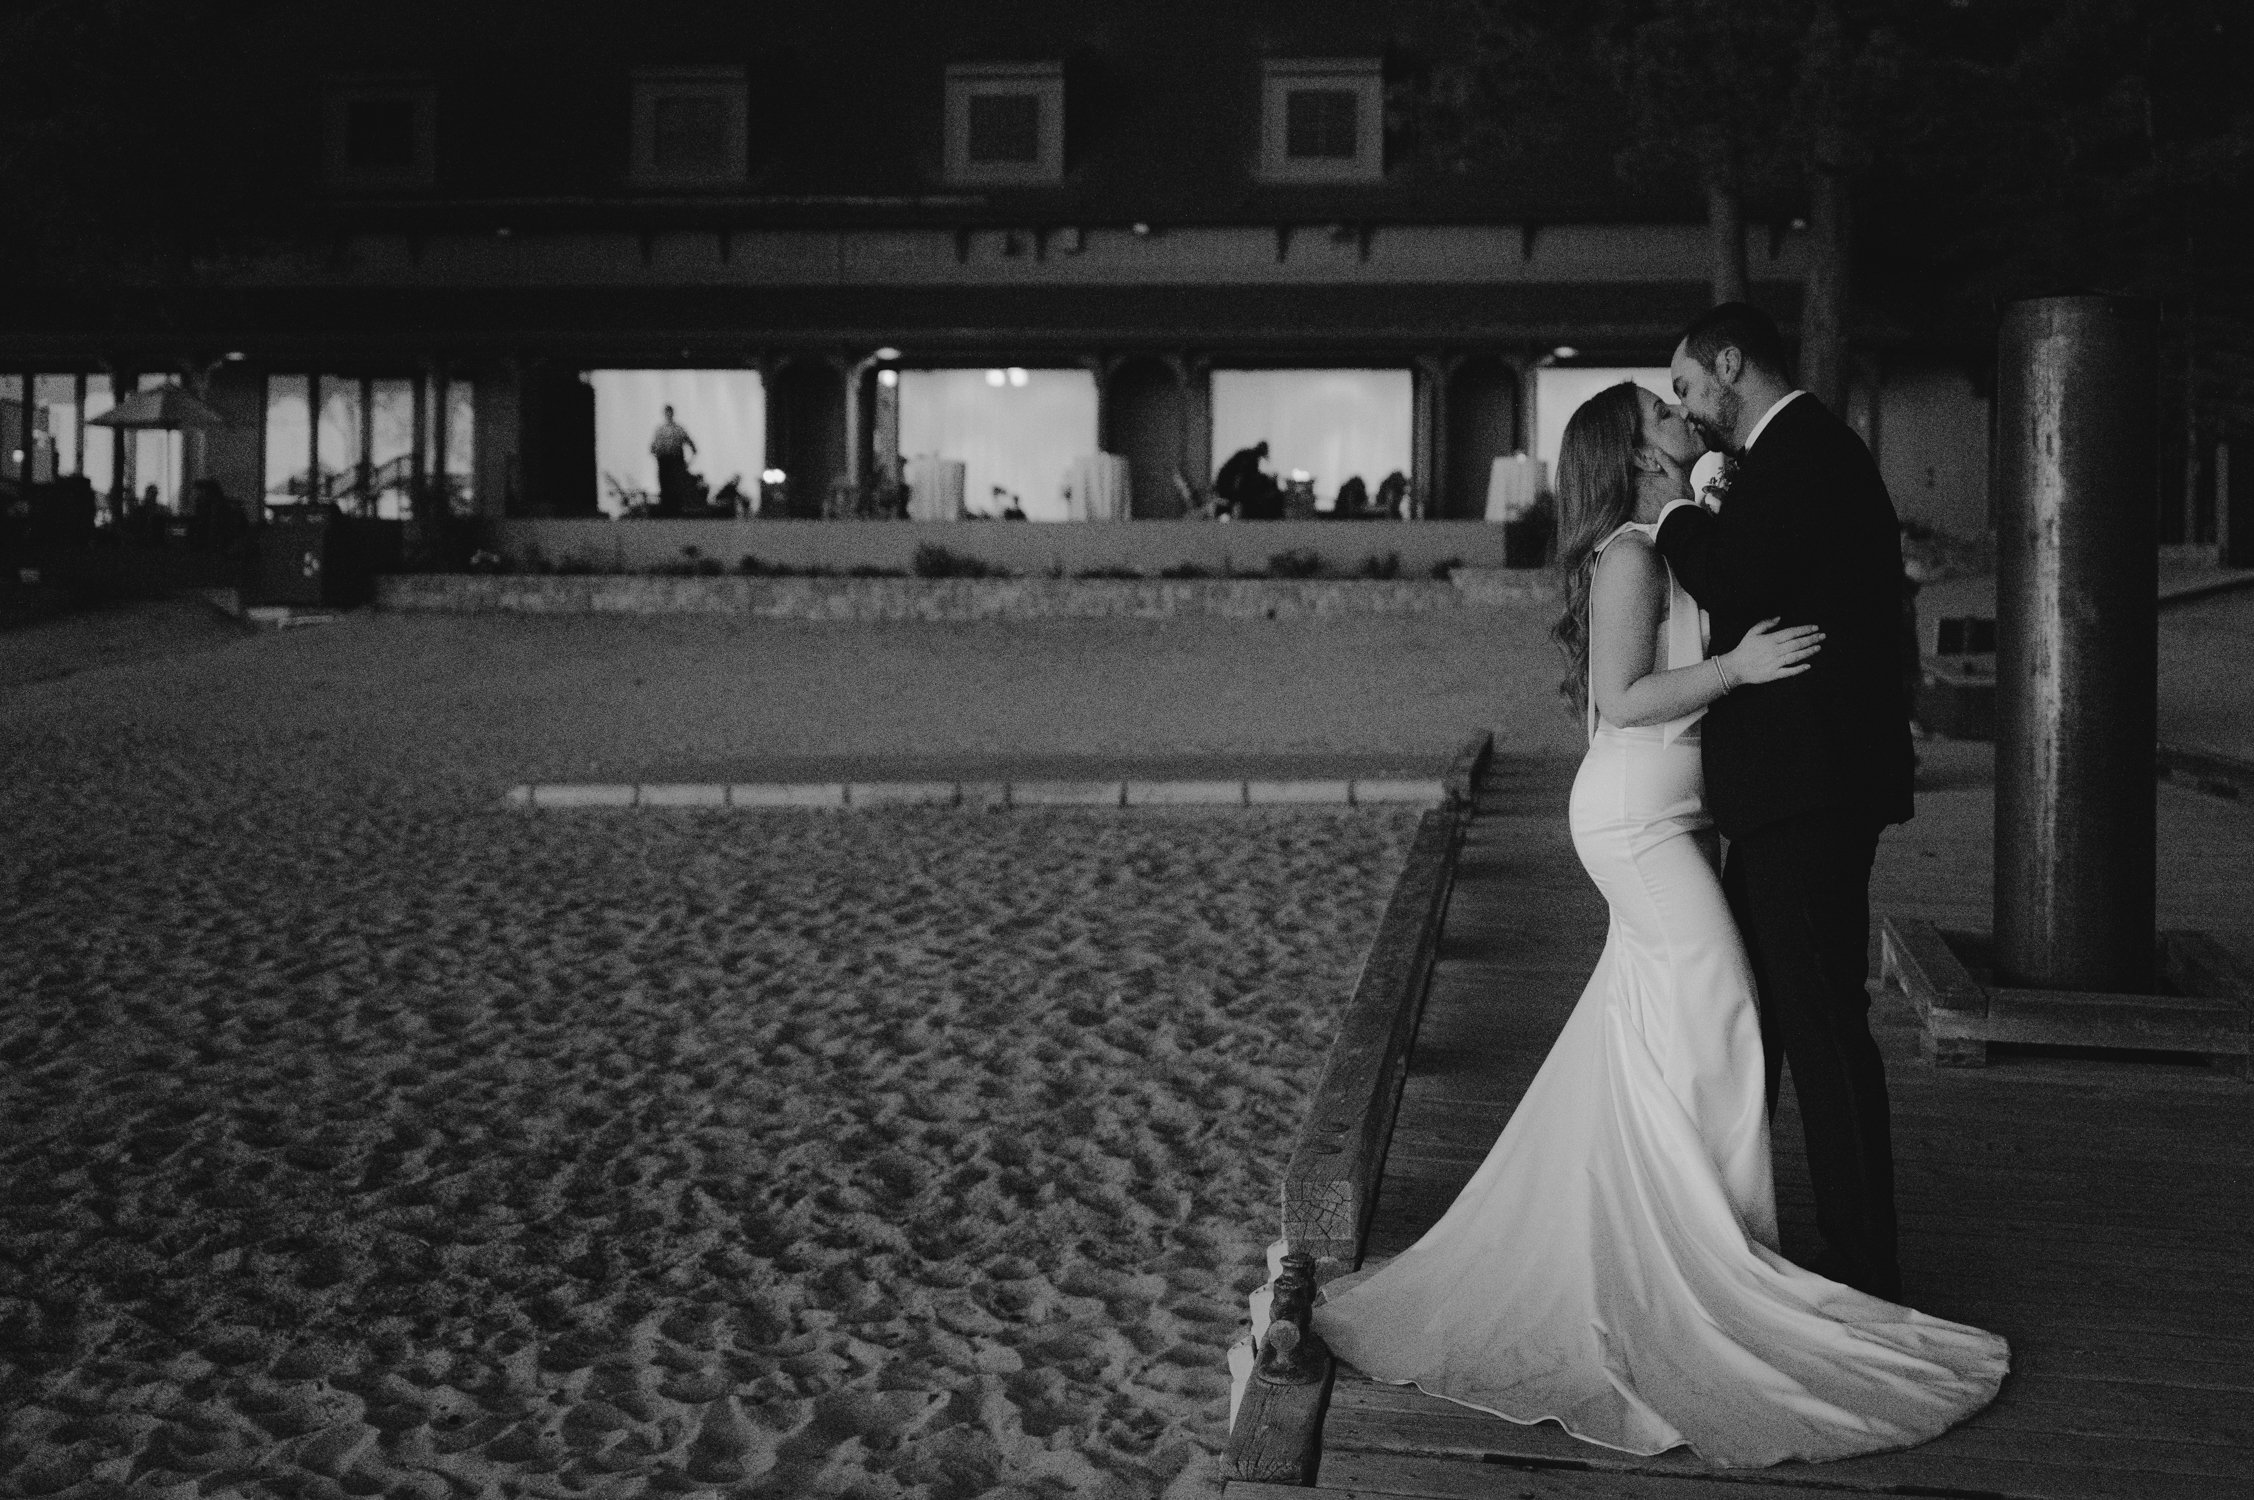 Hyatt Lake Tahoe Wedding, photo of couple in front of the venue